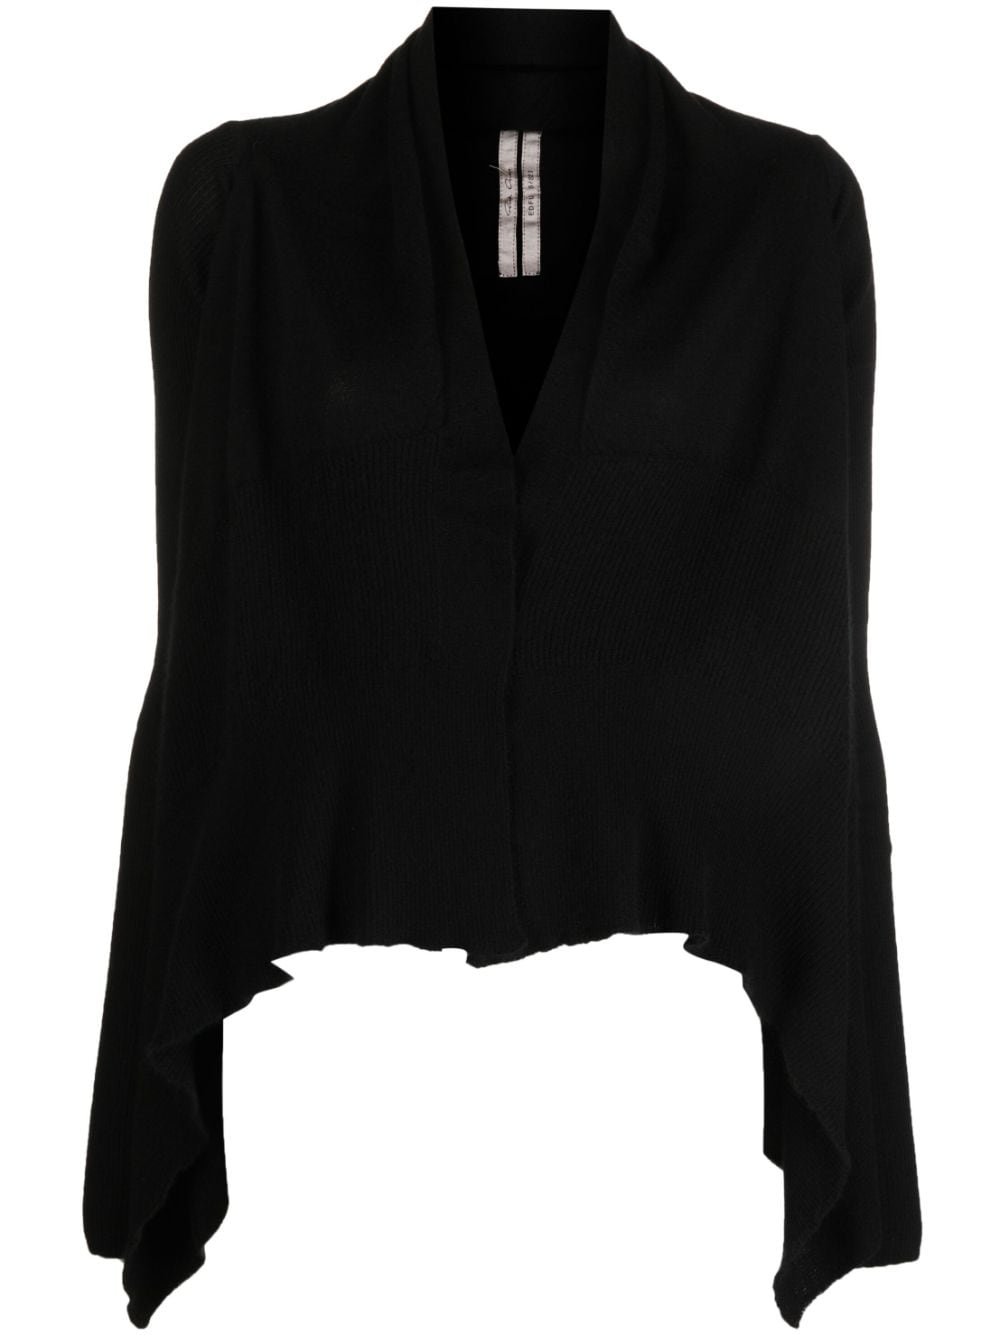 RICK OWENS CASHMERE OPEN-FRONT CARDIGAN